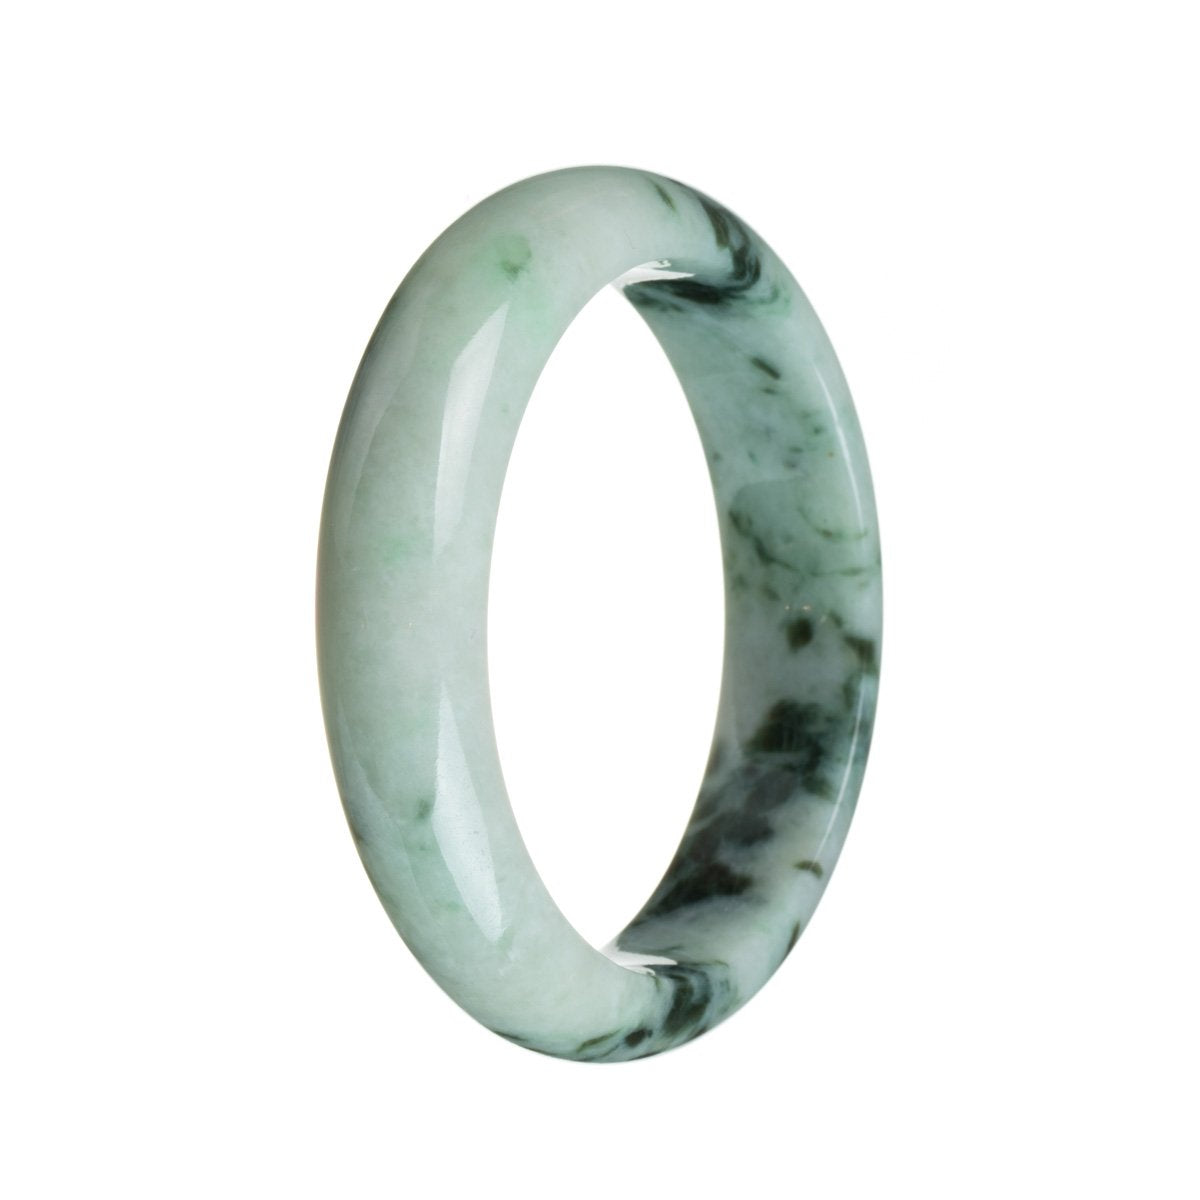 A pale green jade bangle bracelet with a traditional pattern, certified as natural. The bracelet has a half-moon shape and measures 59mm in size. Sold by MAYS GEMS.